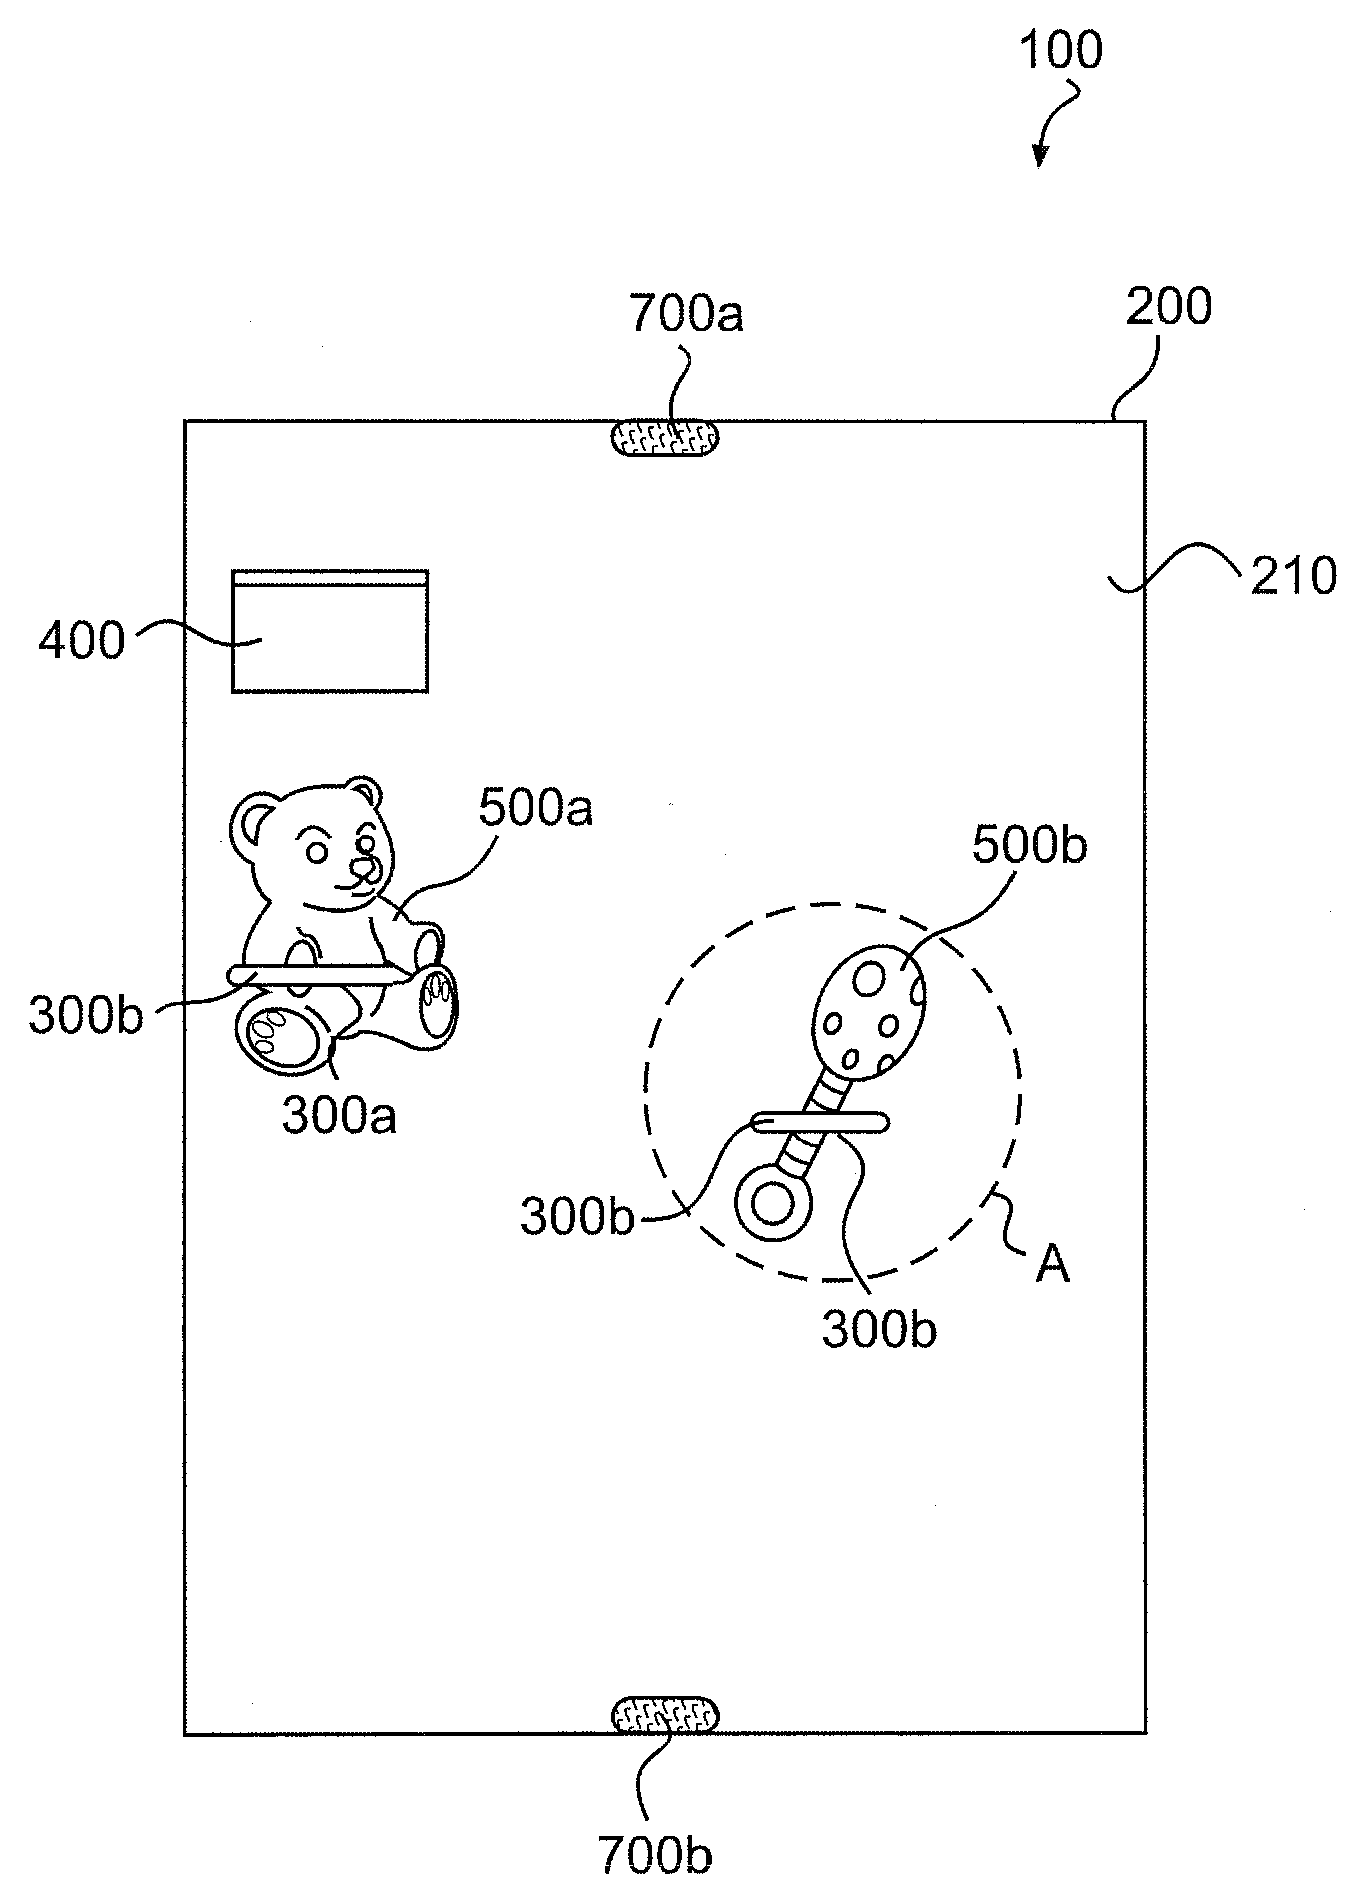 Placemat with toy holder(s) and/or attachment device(s)